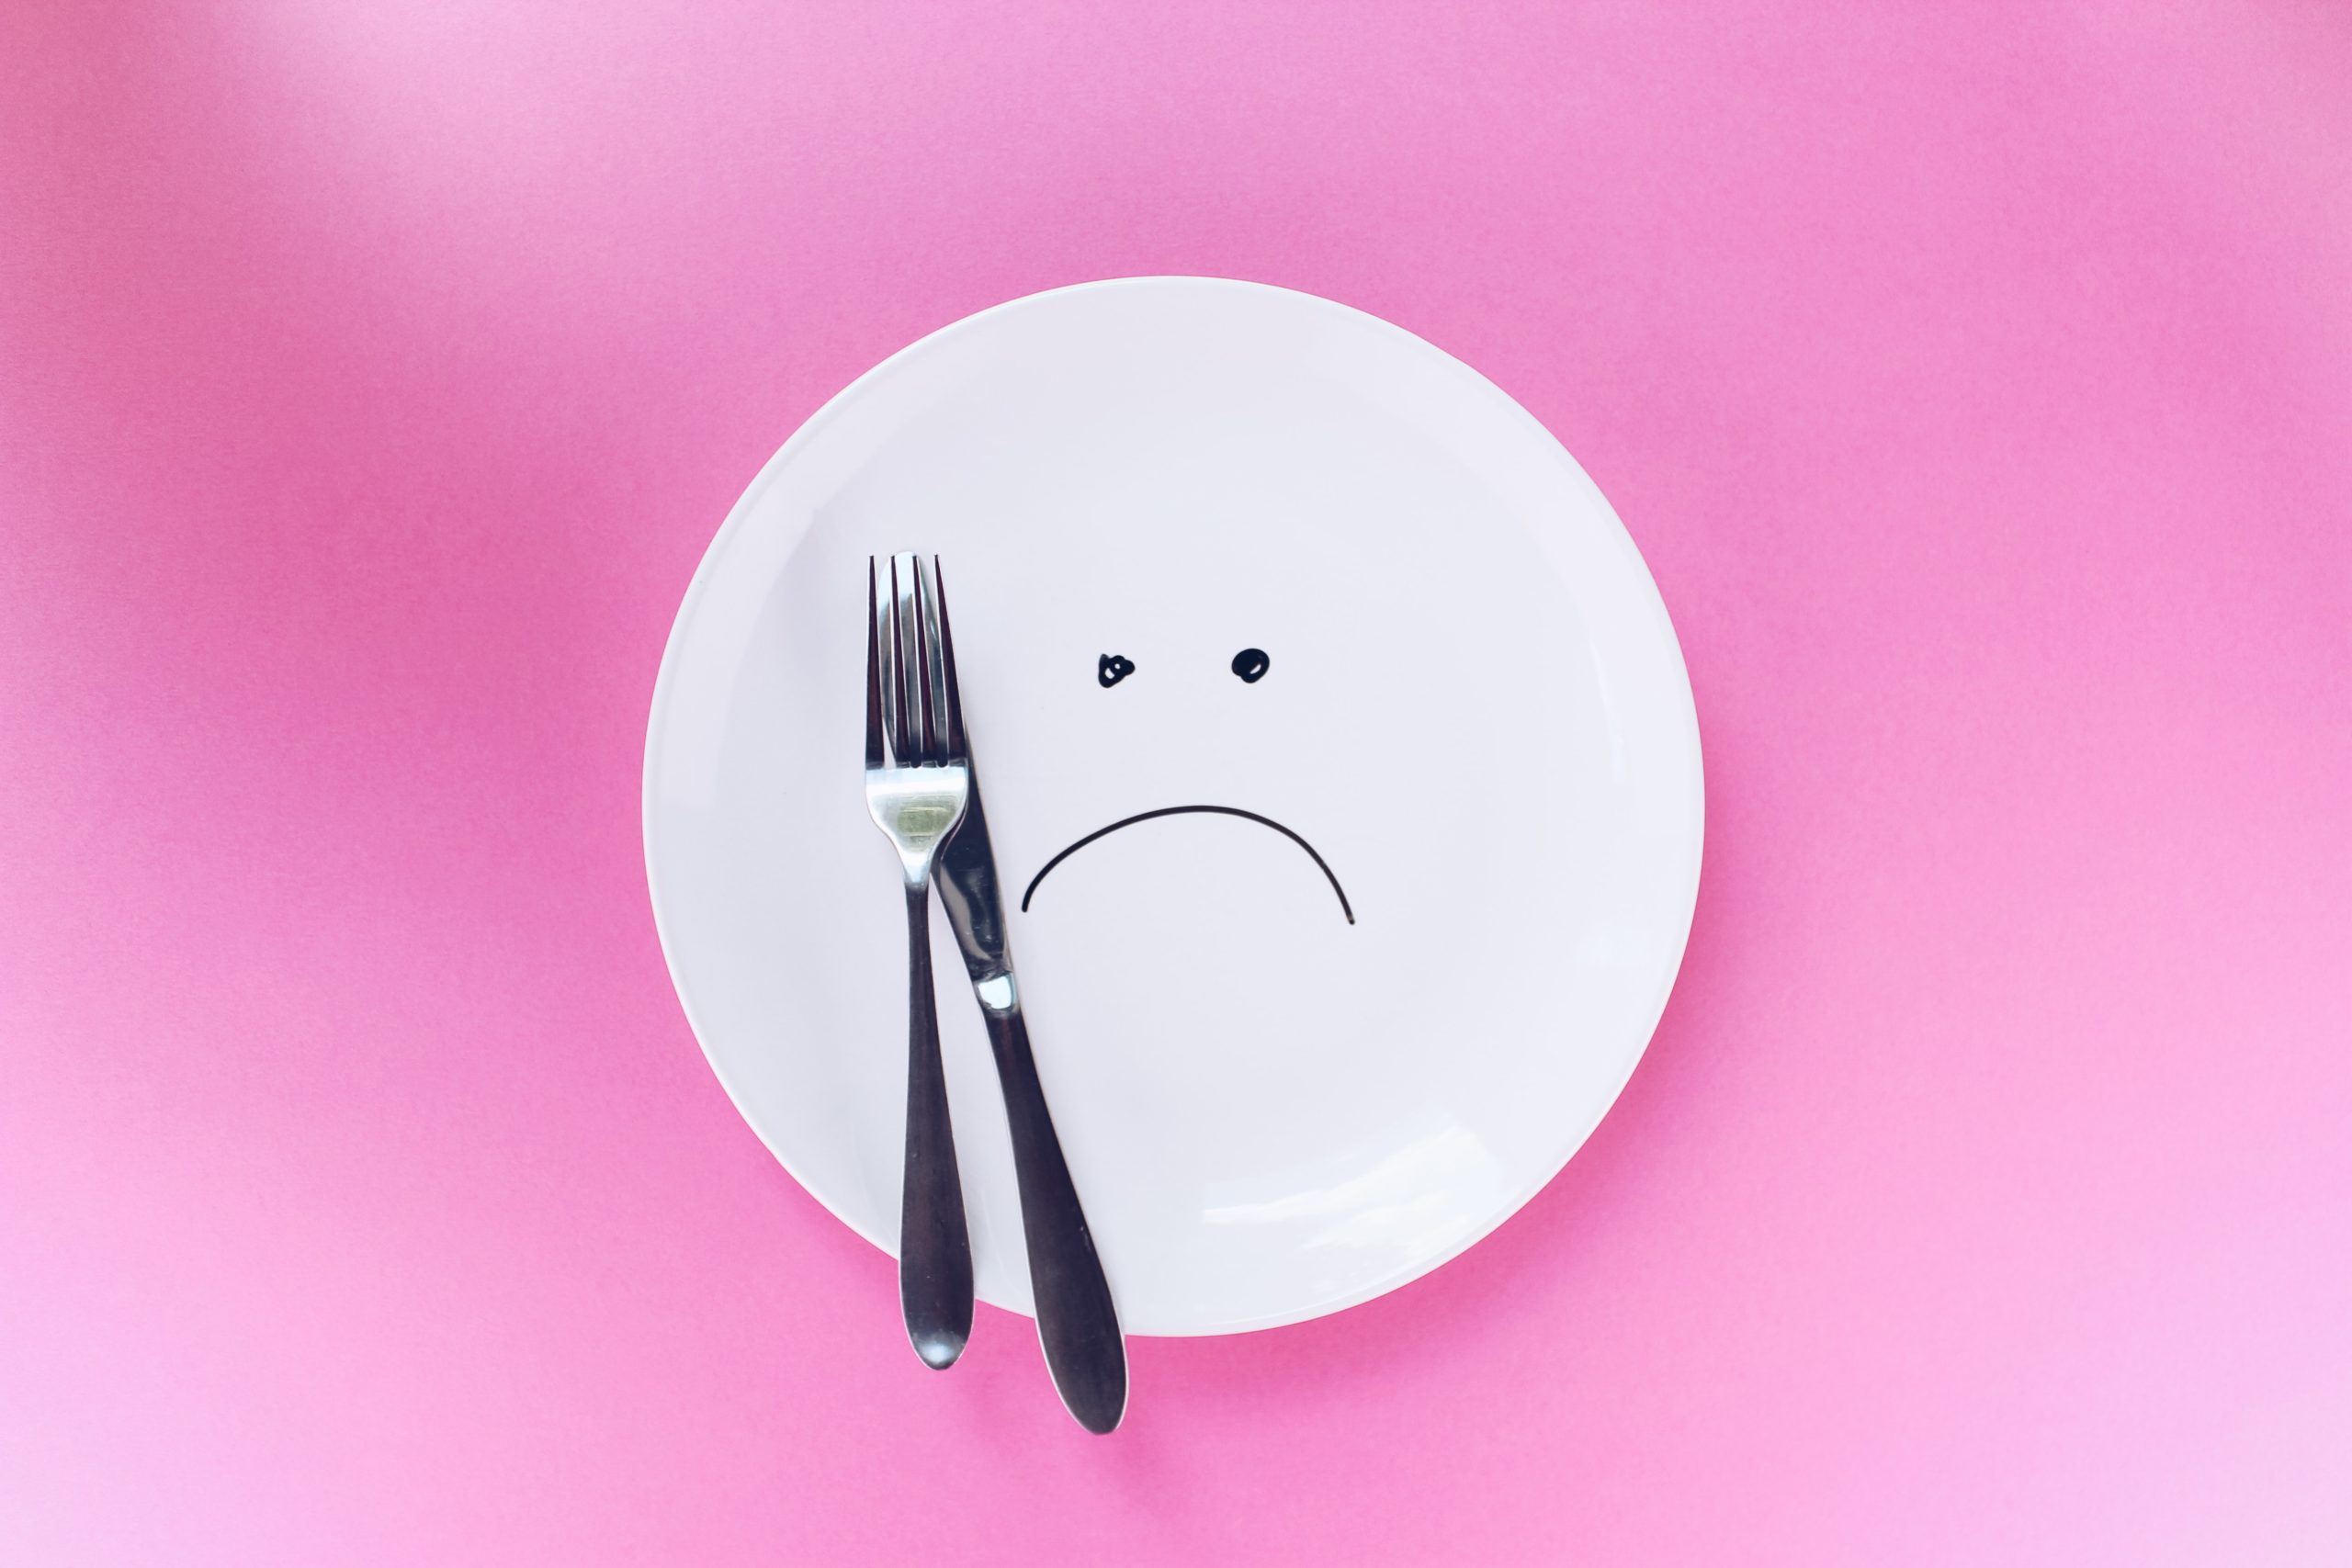 plate with a sad face drawn on it over a bright pink background